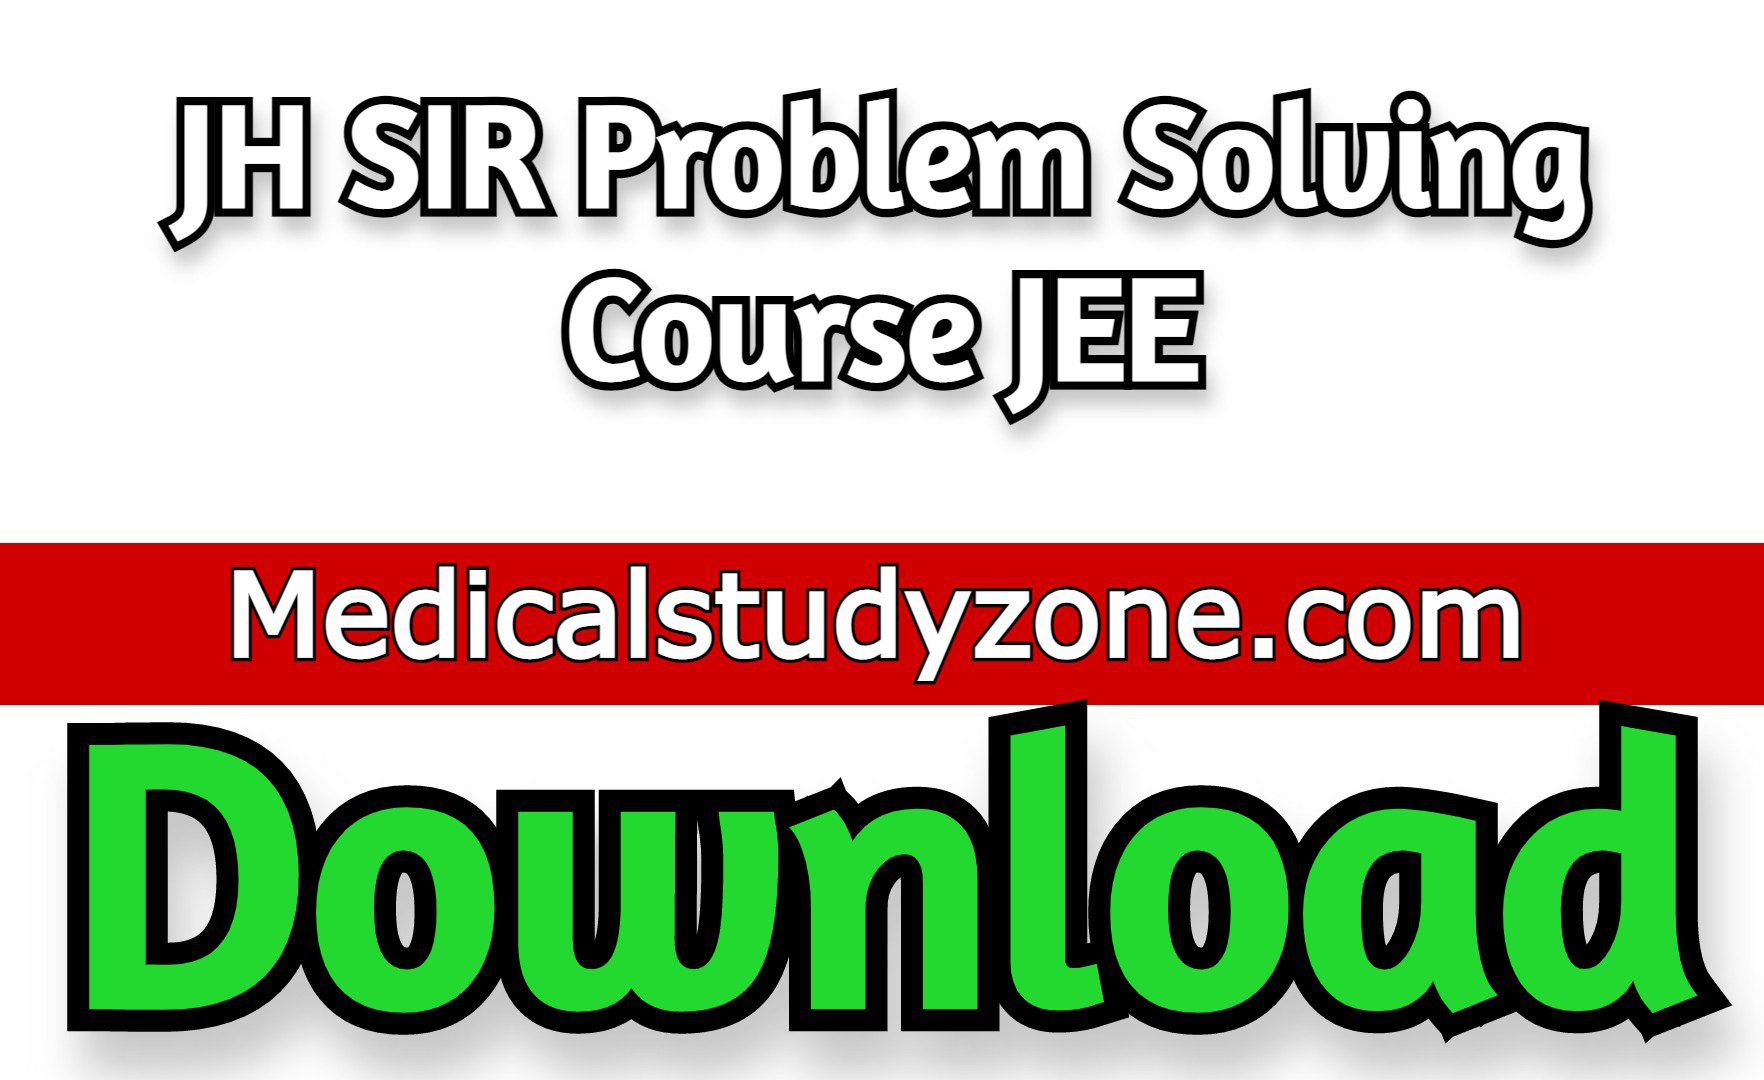 JH SIR Problem Solving Course JEE 2022 Free Download